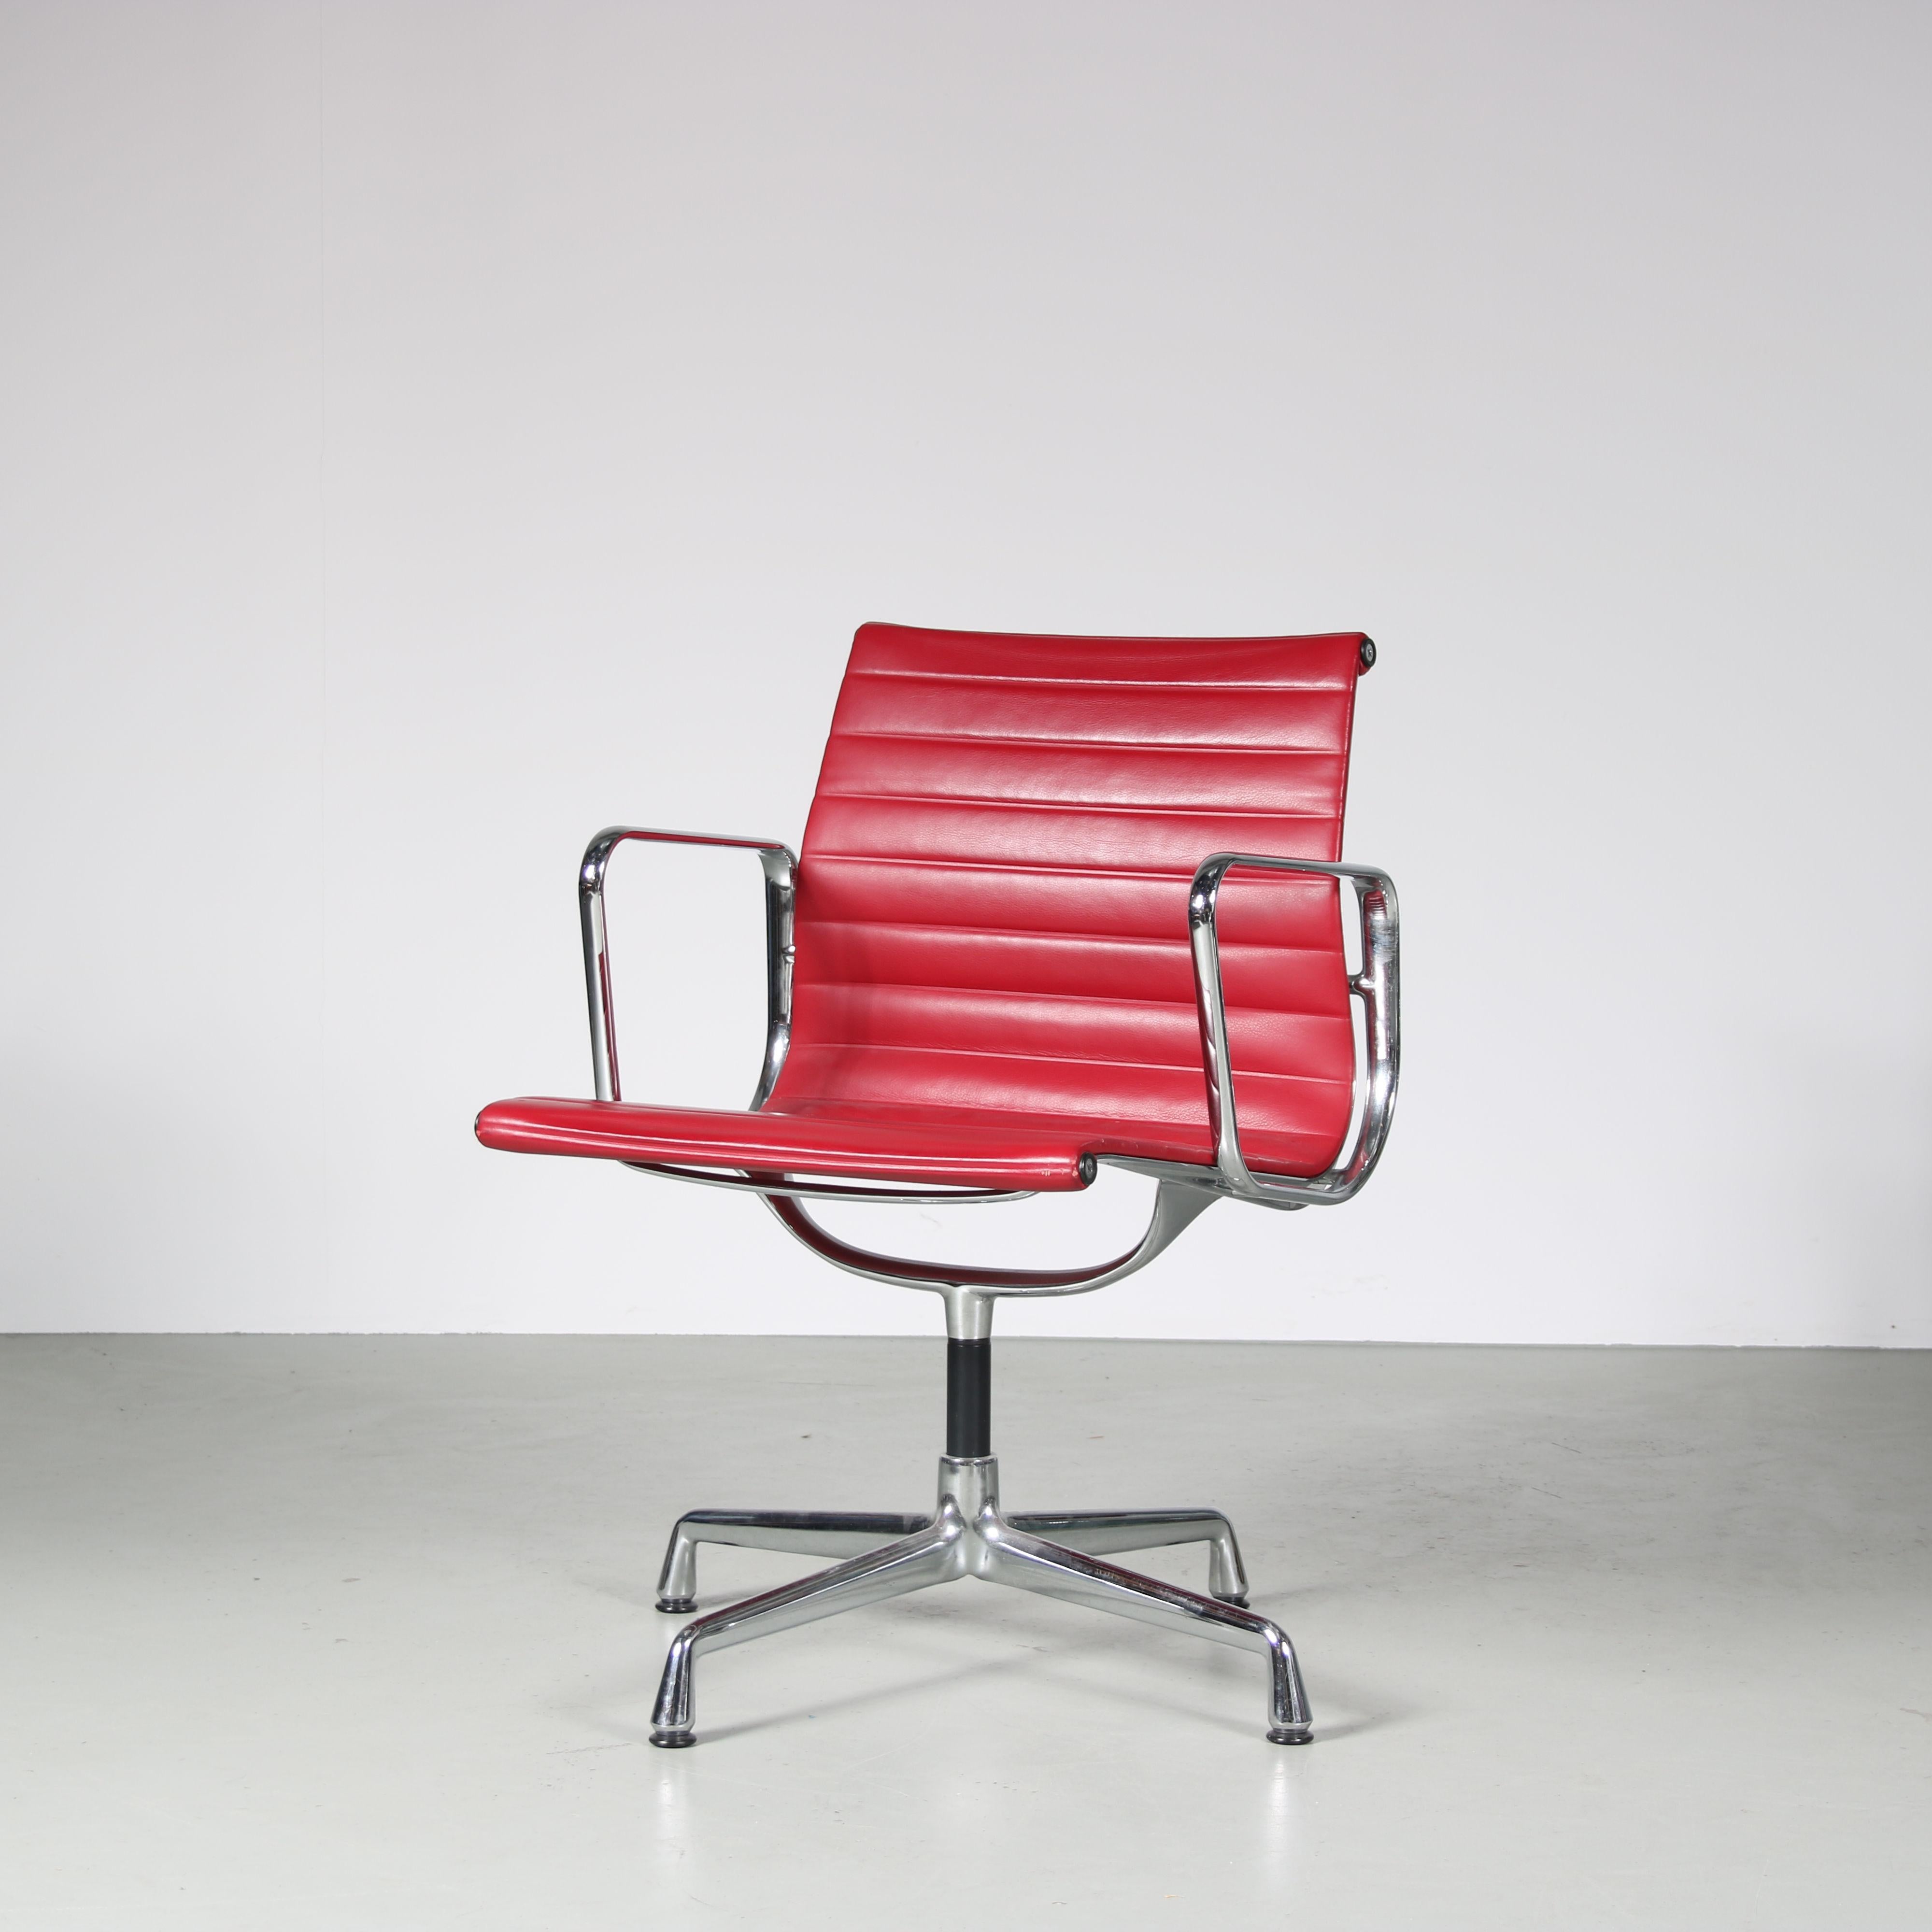 A wonderful conference / desk chair designed by Charles & Ray Eames, manufactured by Vitra in Germany in 2004.

This office chair is one of the most recognizable pieces of mid-century design! The piece has a chrome plated metal frame with black